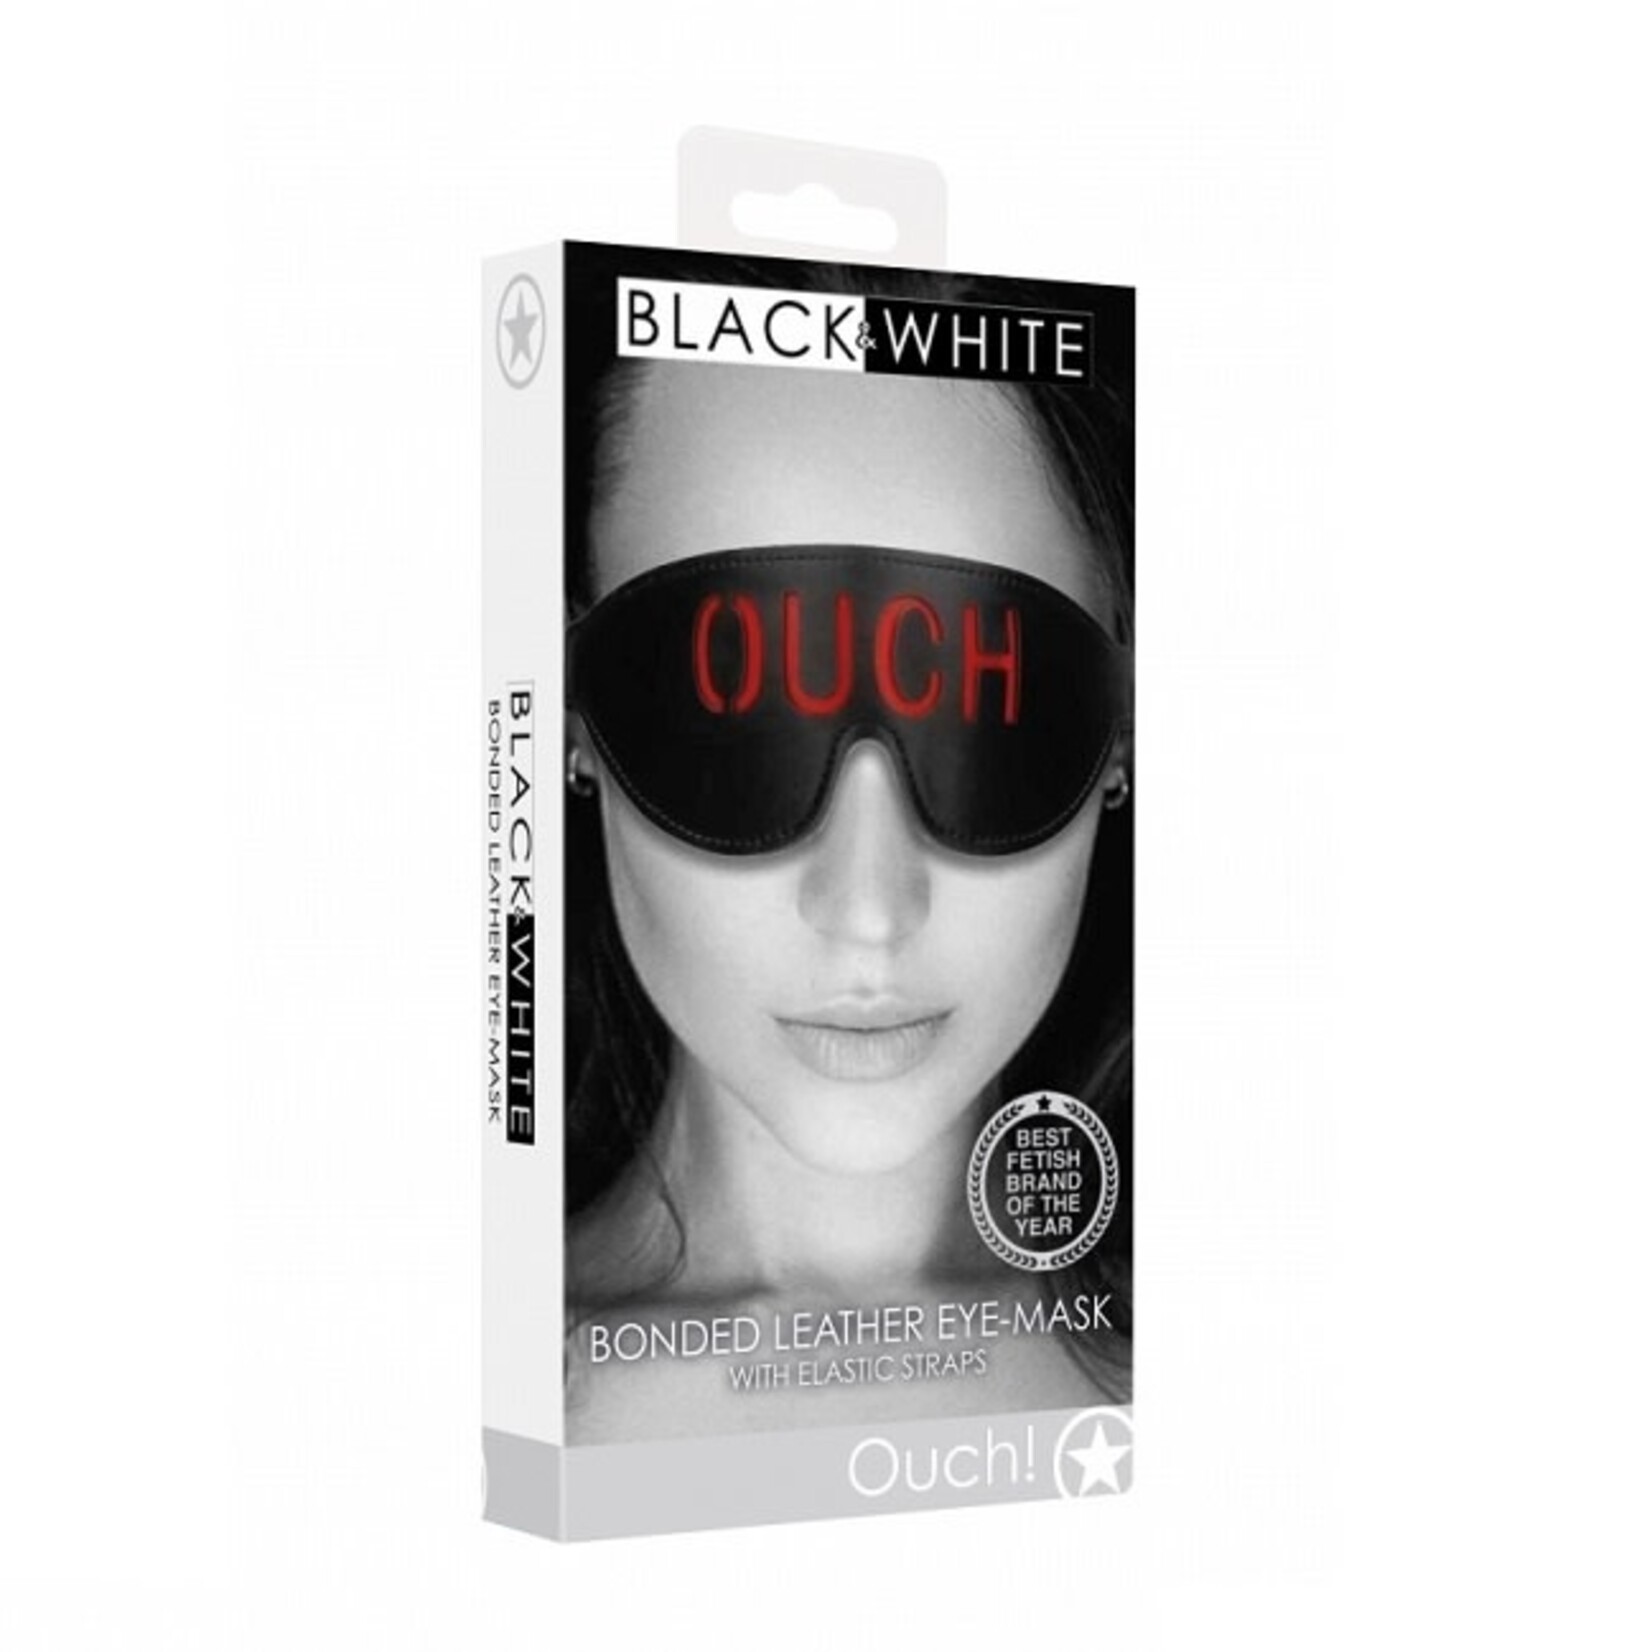 Shots America Ouch! Black & White Bonded Leather Eye-Mask "Ouch"